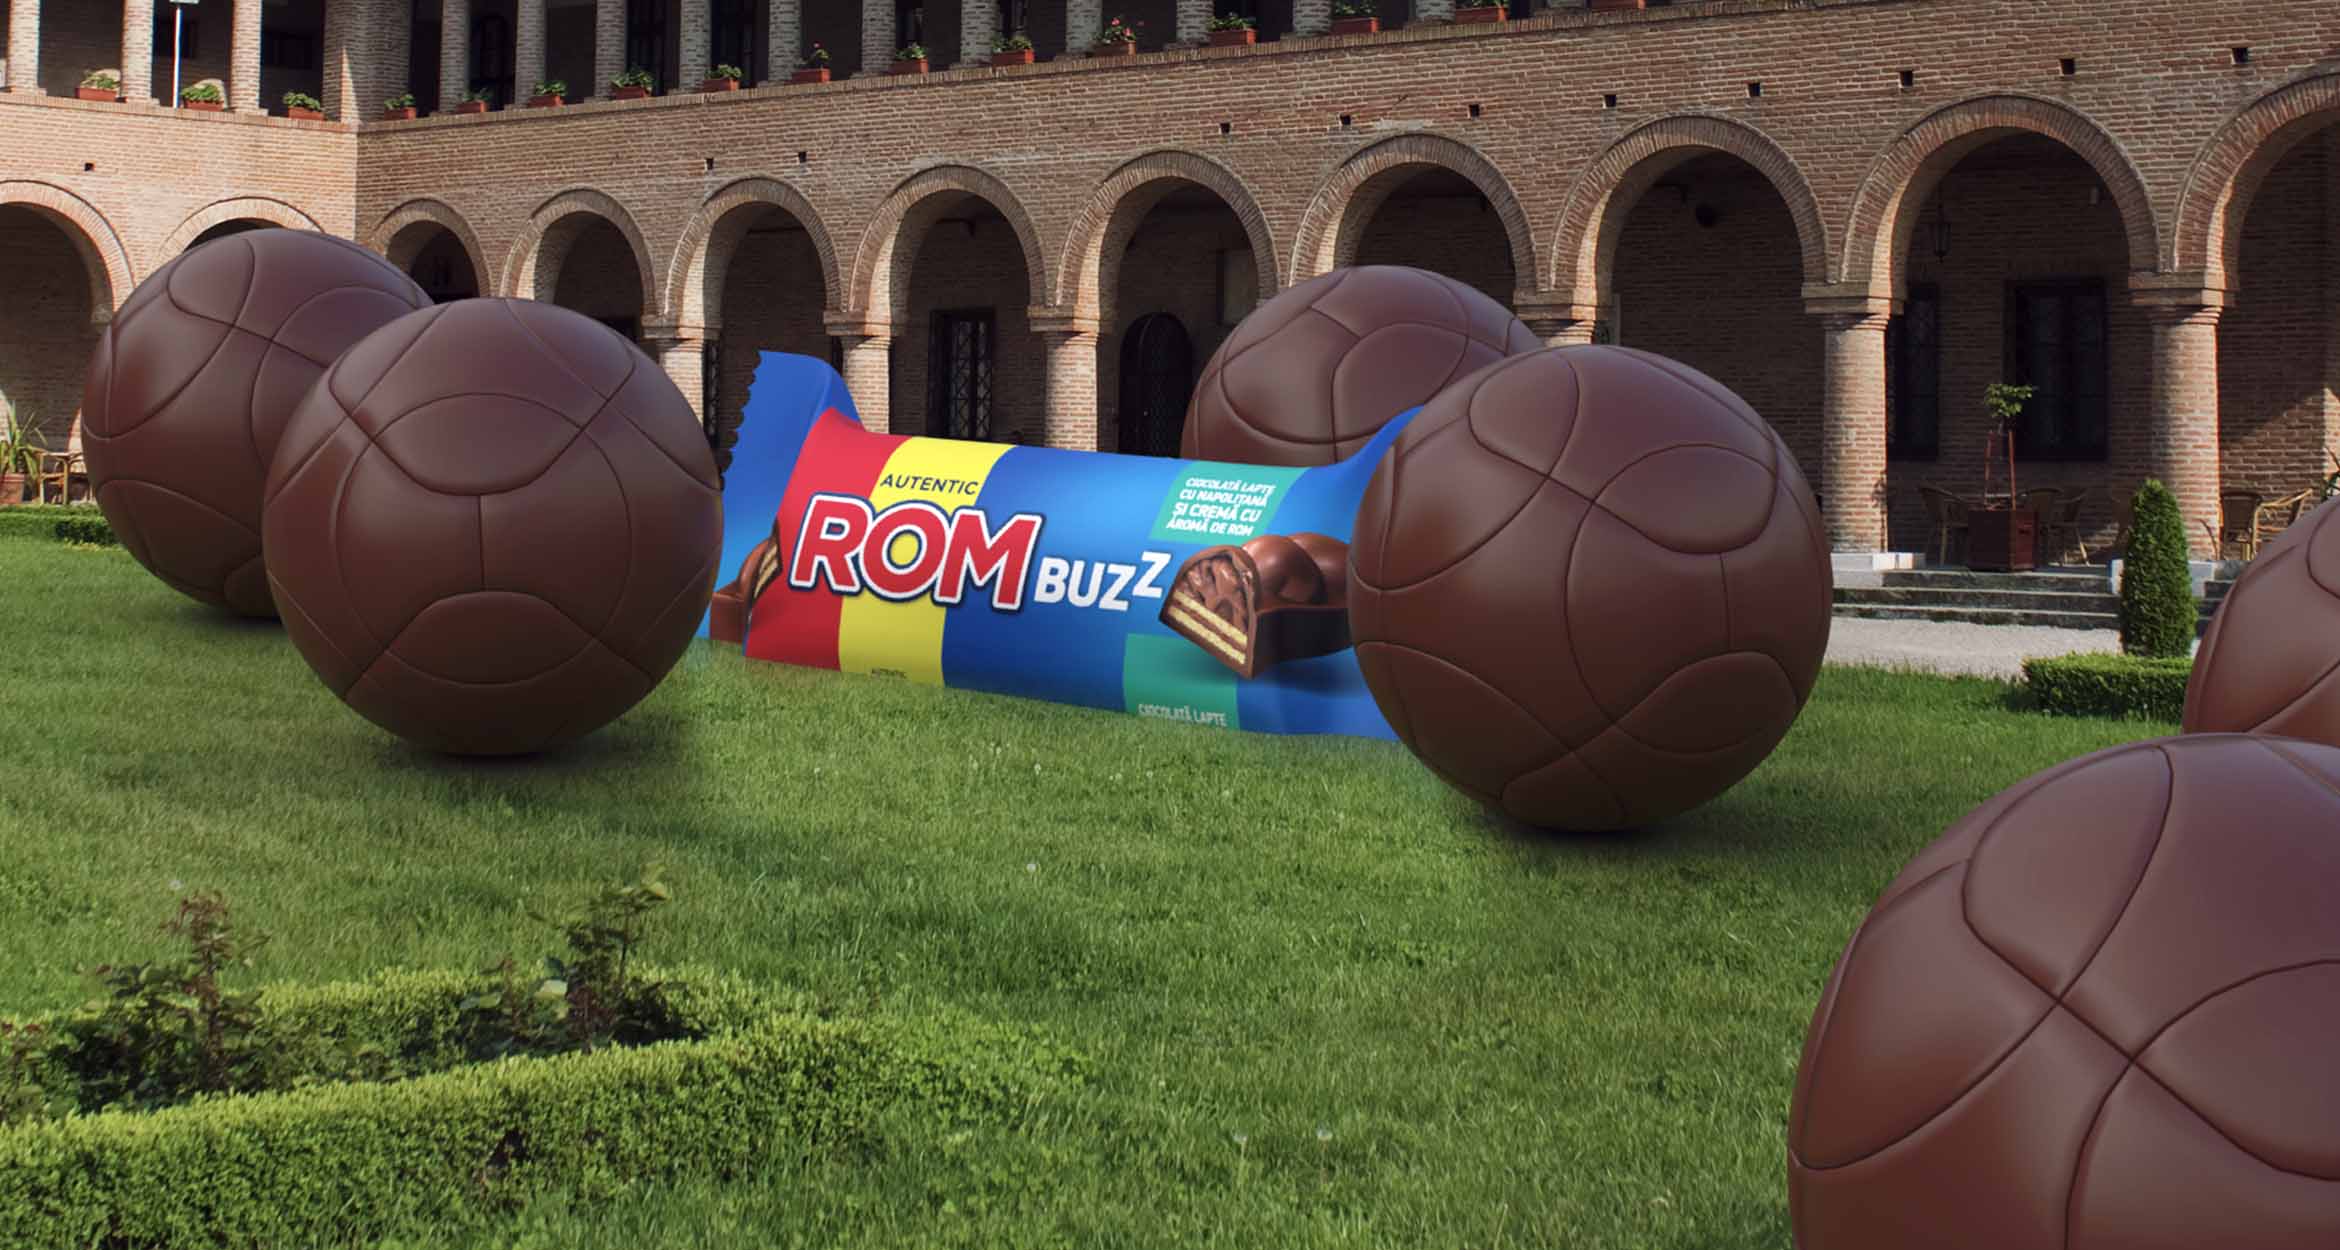 ROM Buzz candy bar in wrapper in a courtyard among giant chocolate footballs